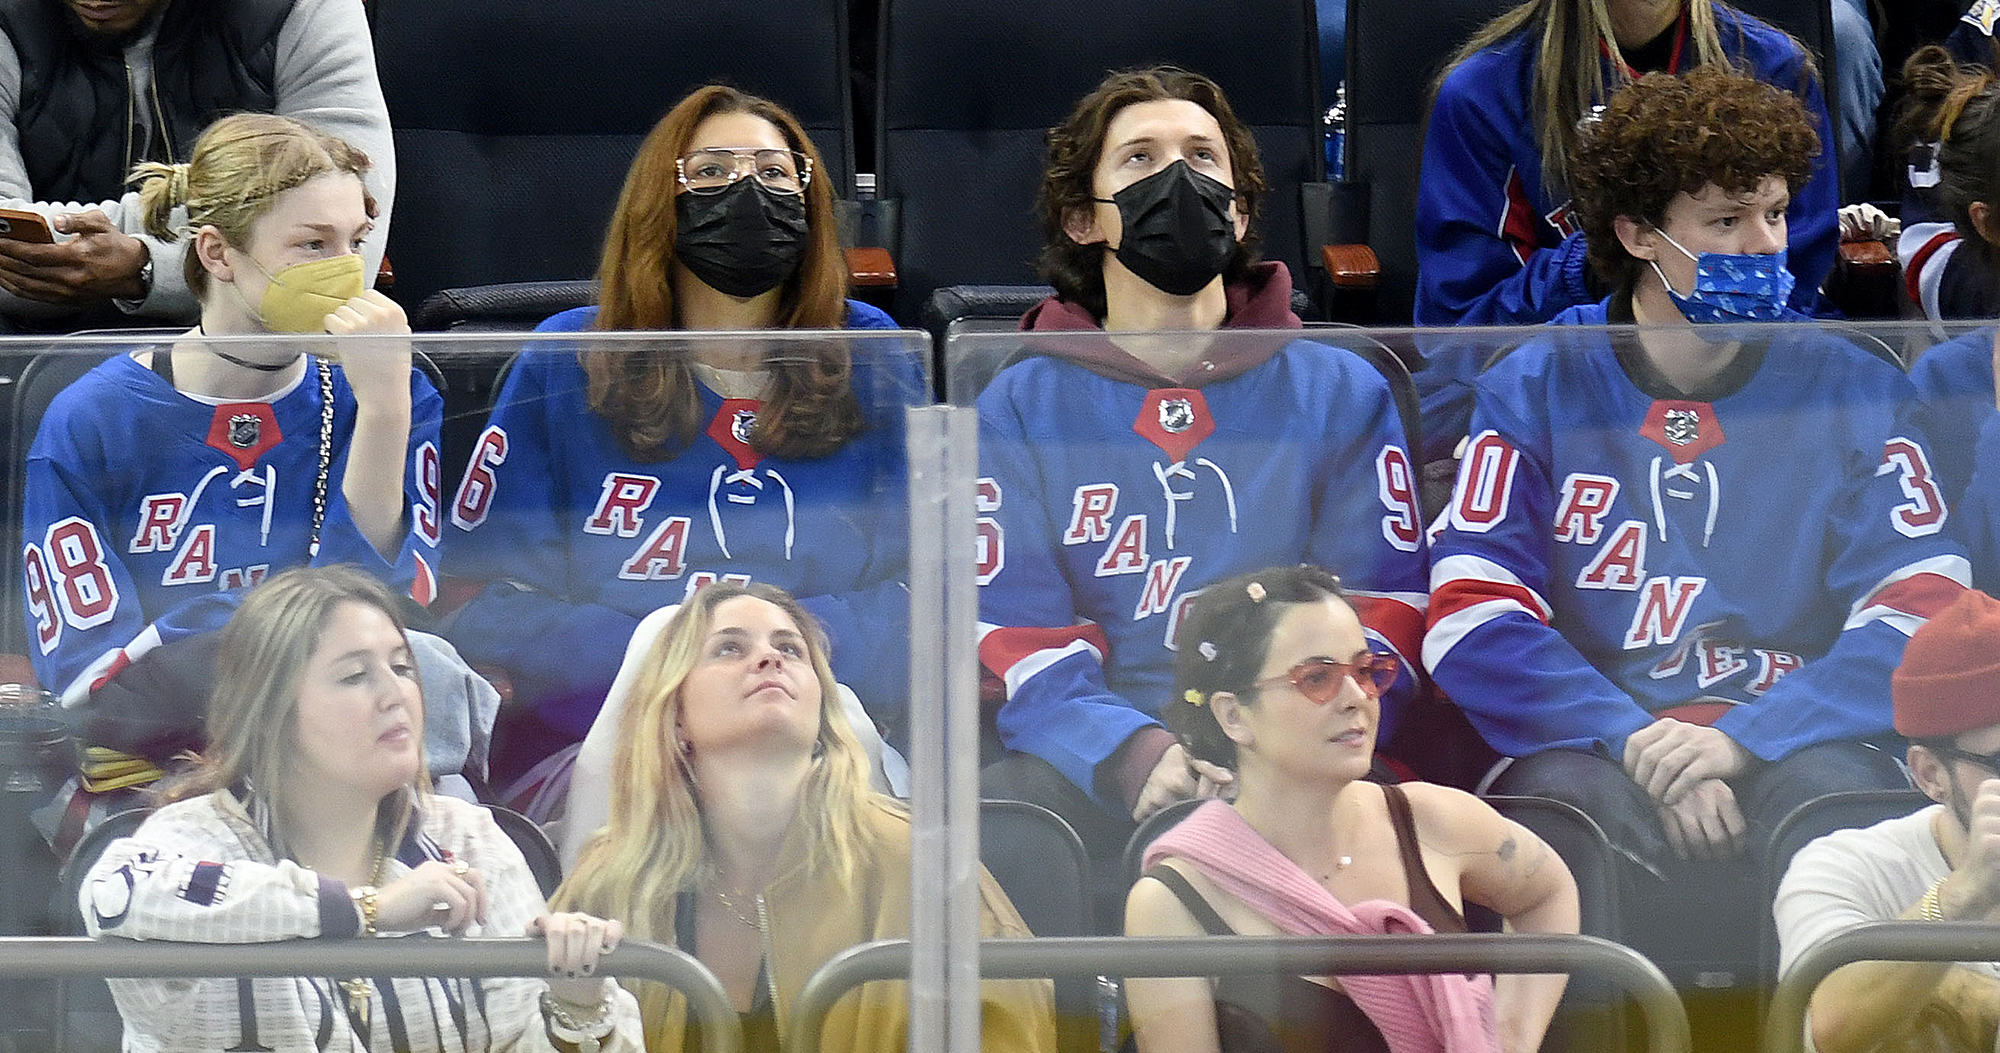 Tom Holland and friends at the Rangers v. Red Wings game in New